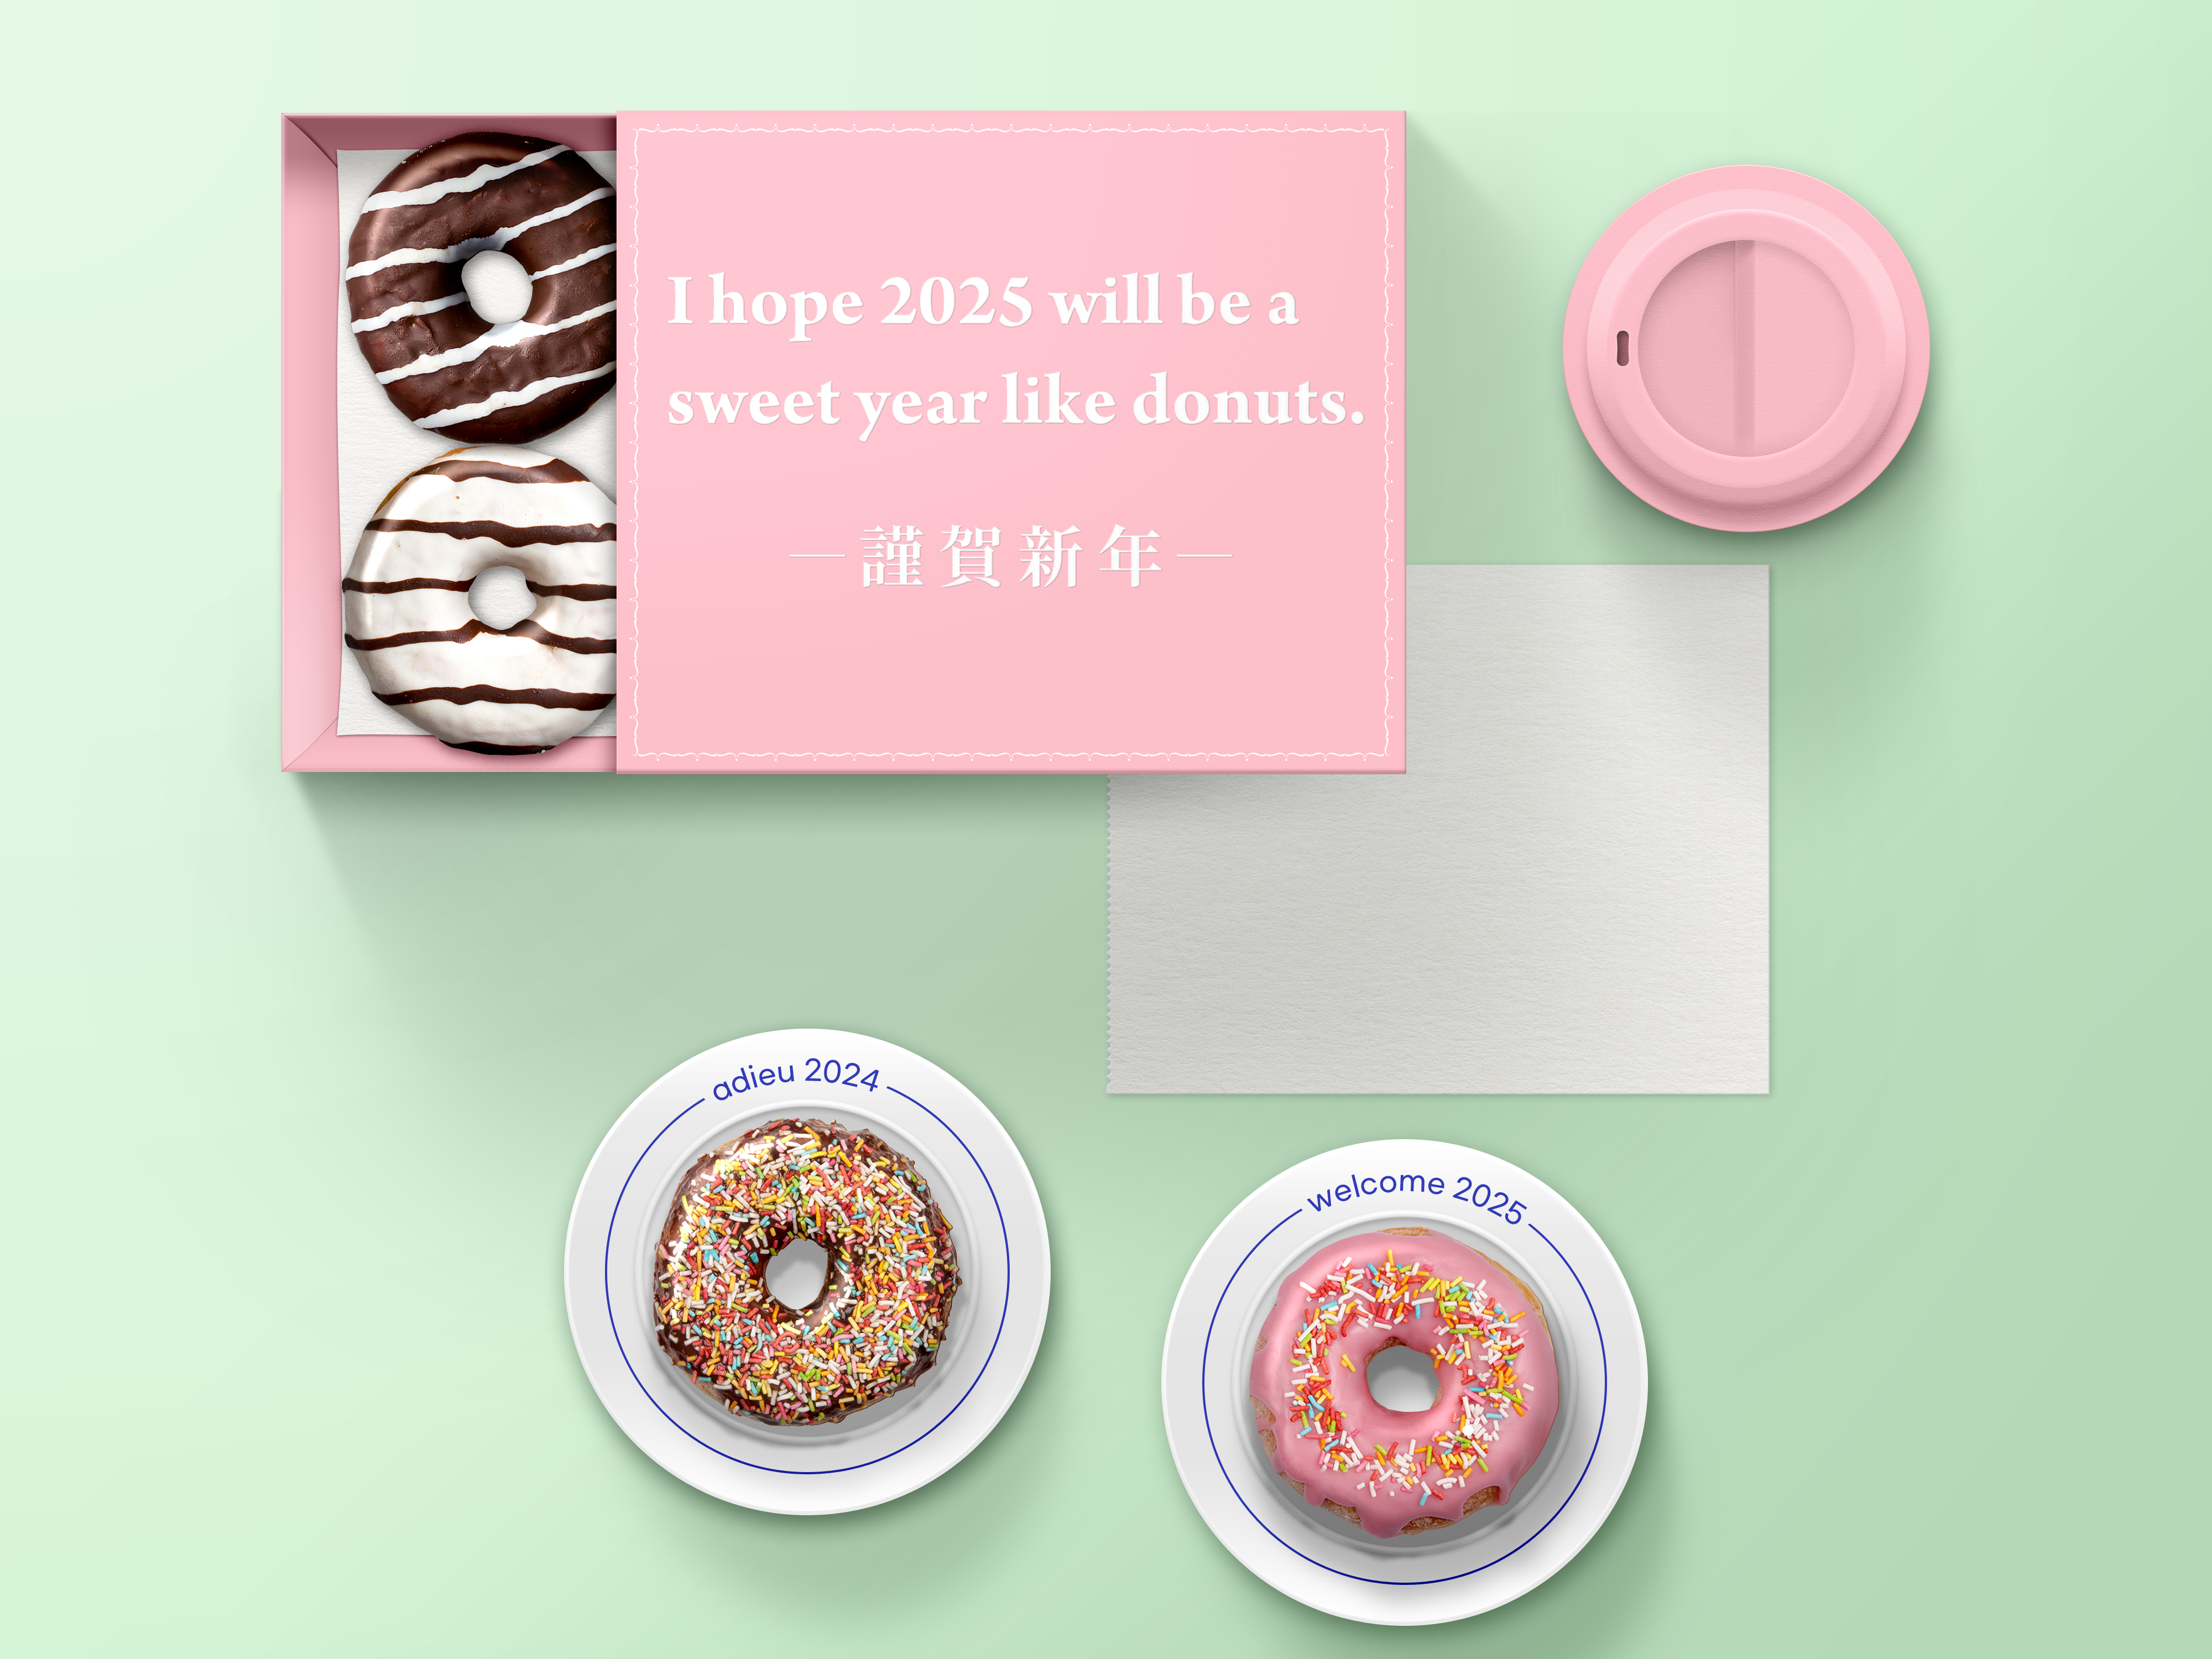 General 4000x3000 2025 (year) New Year donut kanji text simple background French top view 2024 (year) food sweets plates